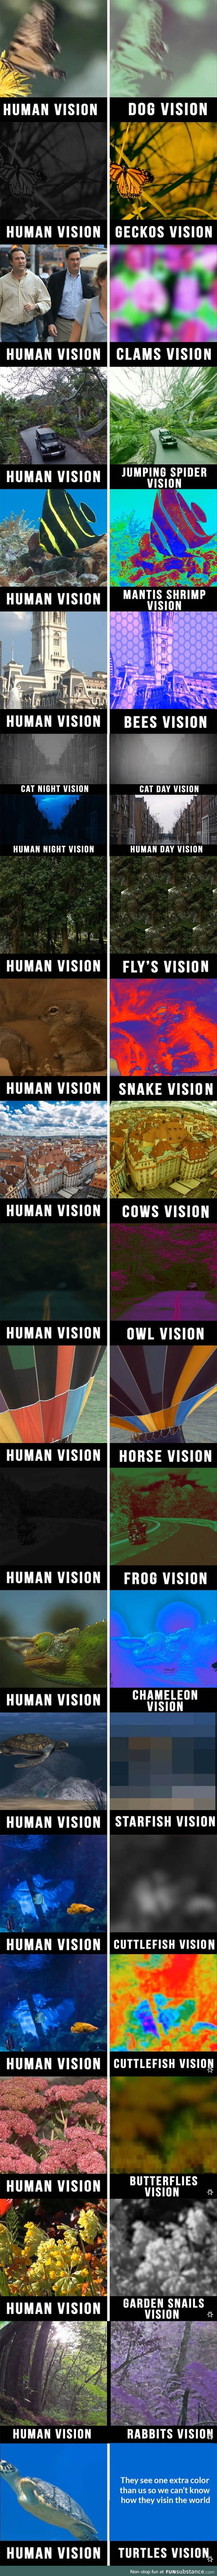 How we vision the world VS how other animals do